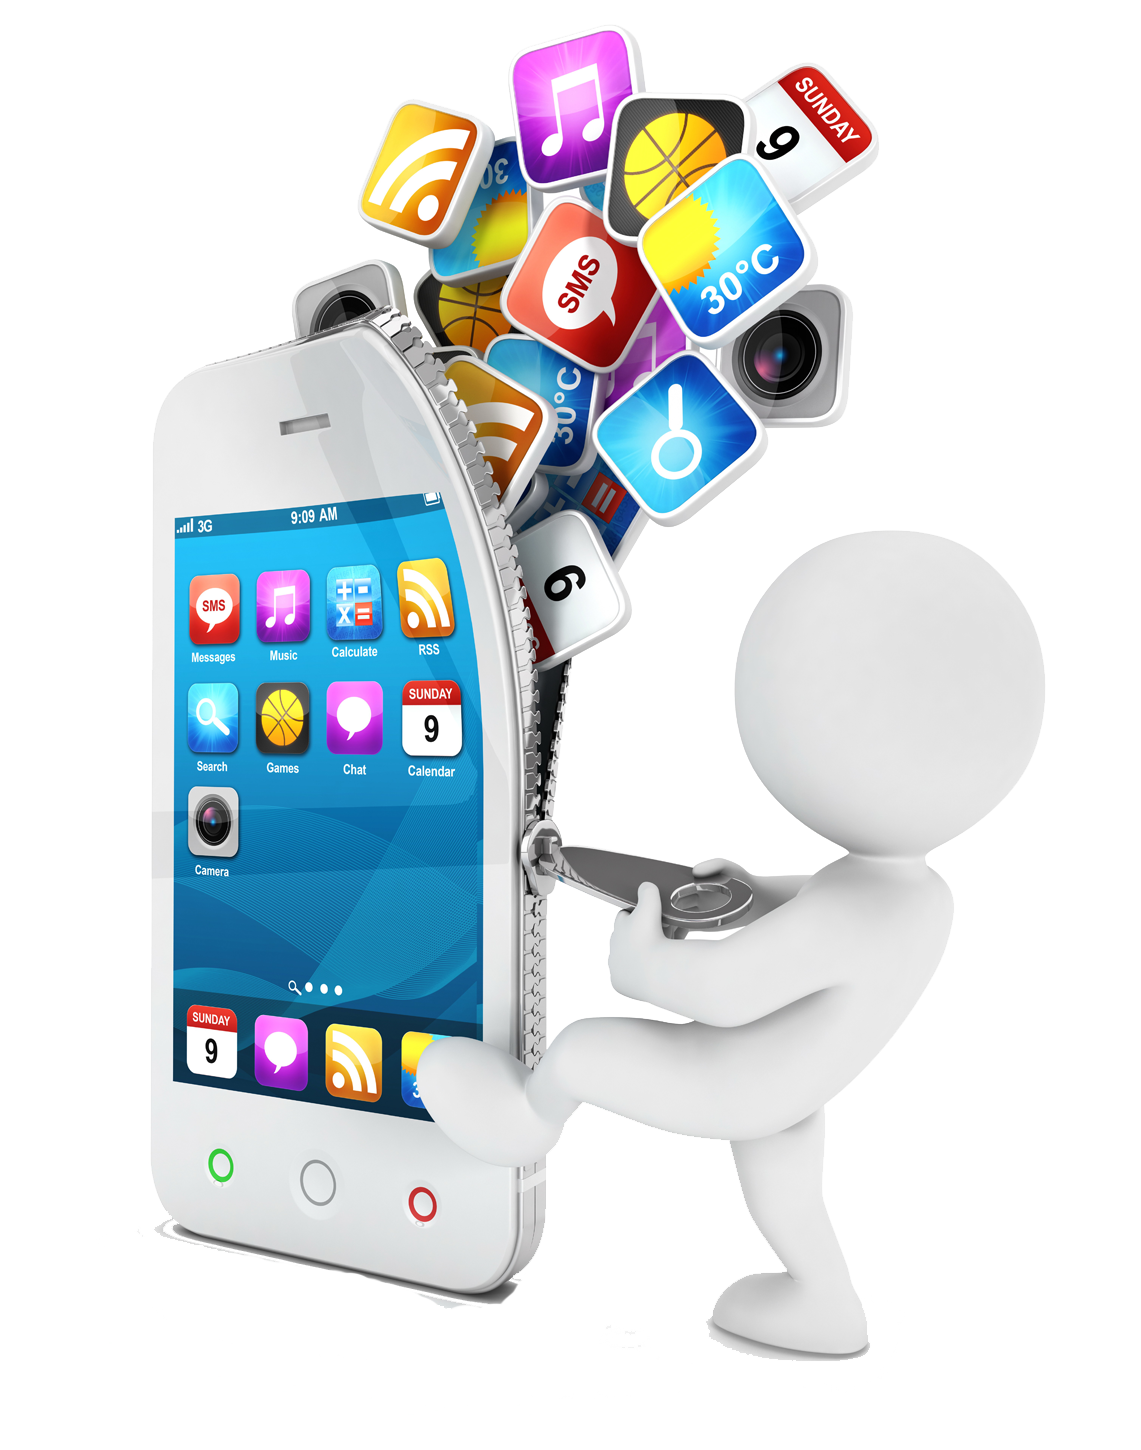 Development Smartphone Phone Mobile App Accessories Application PNG Image